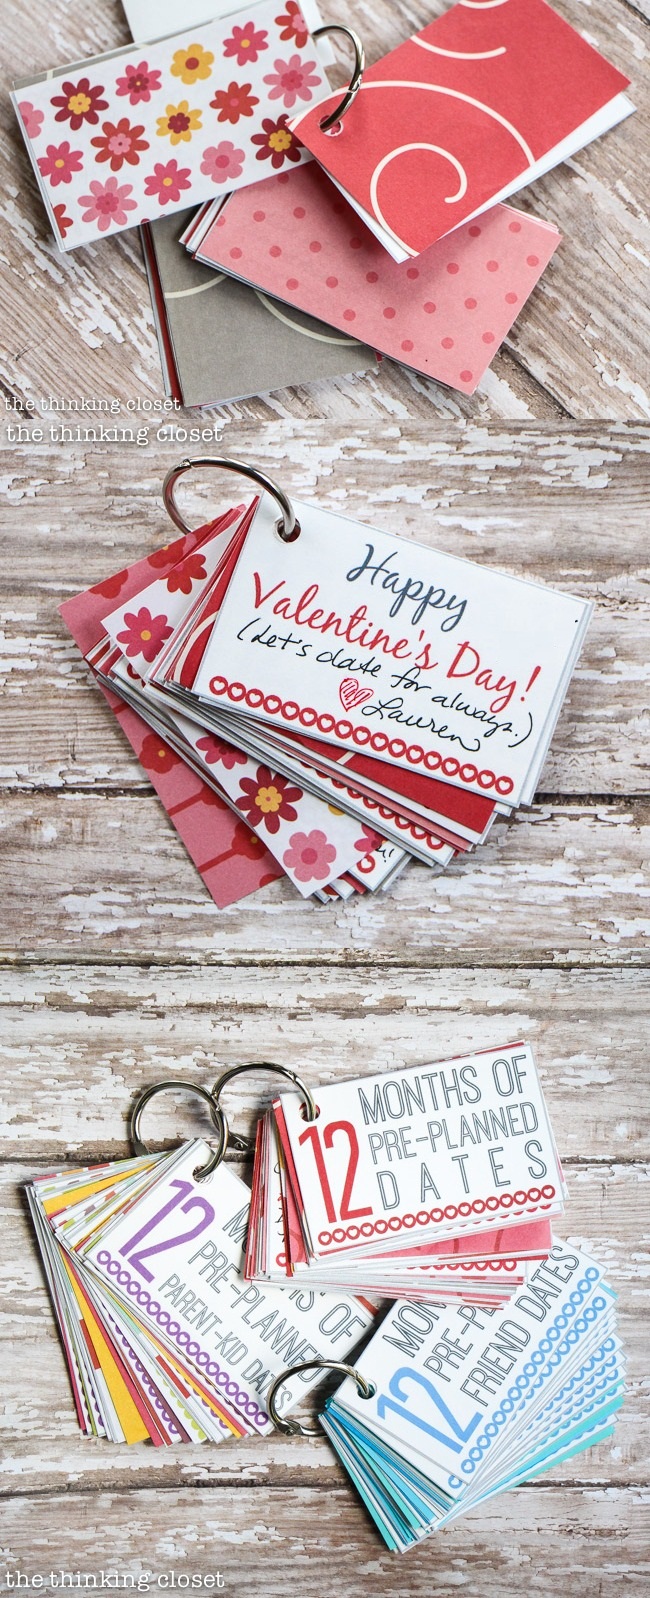 8-months-of-date-nights-gift-free-printable